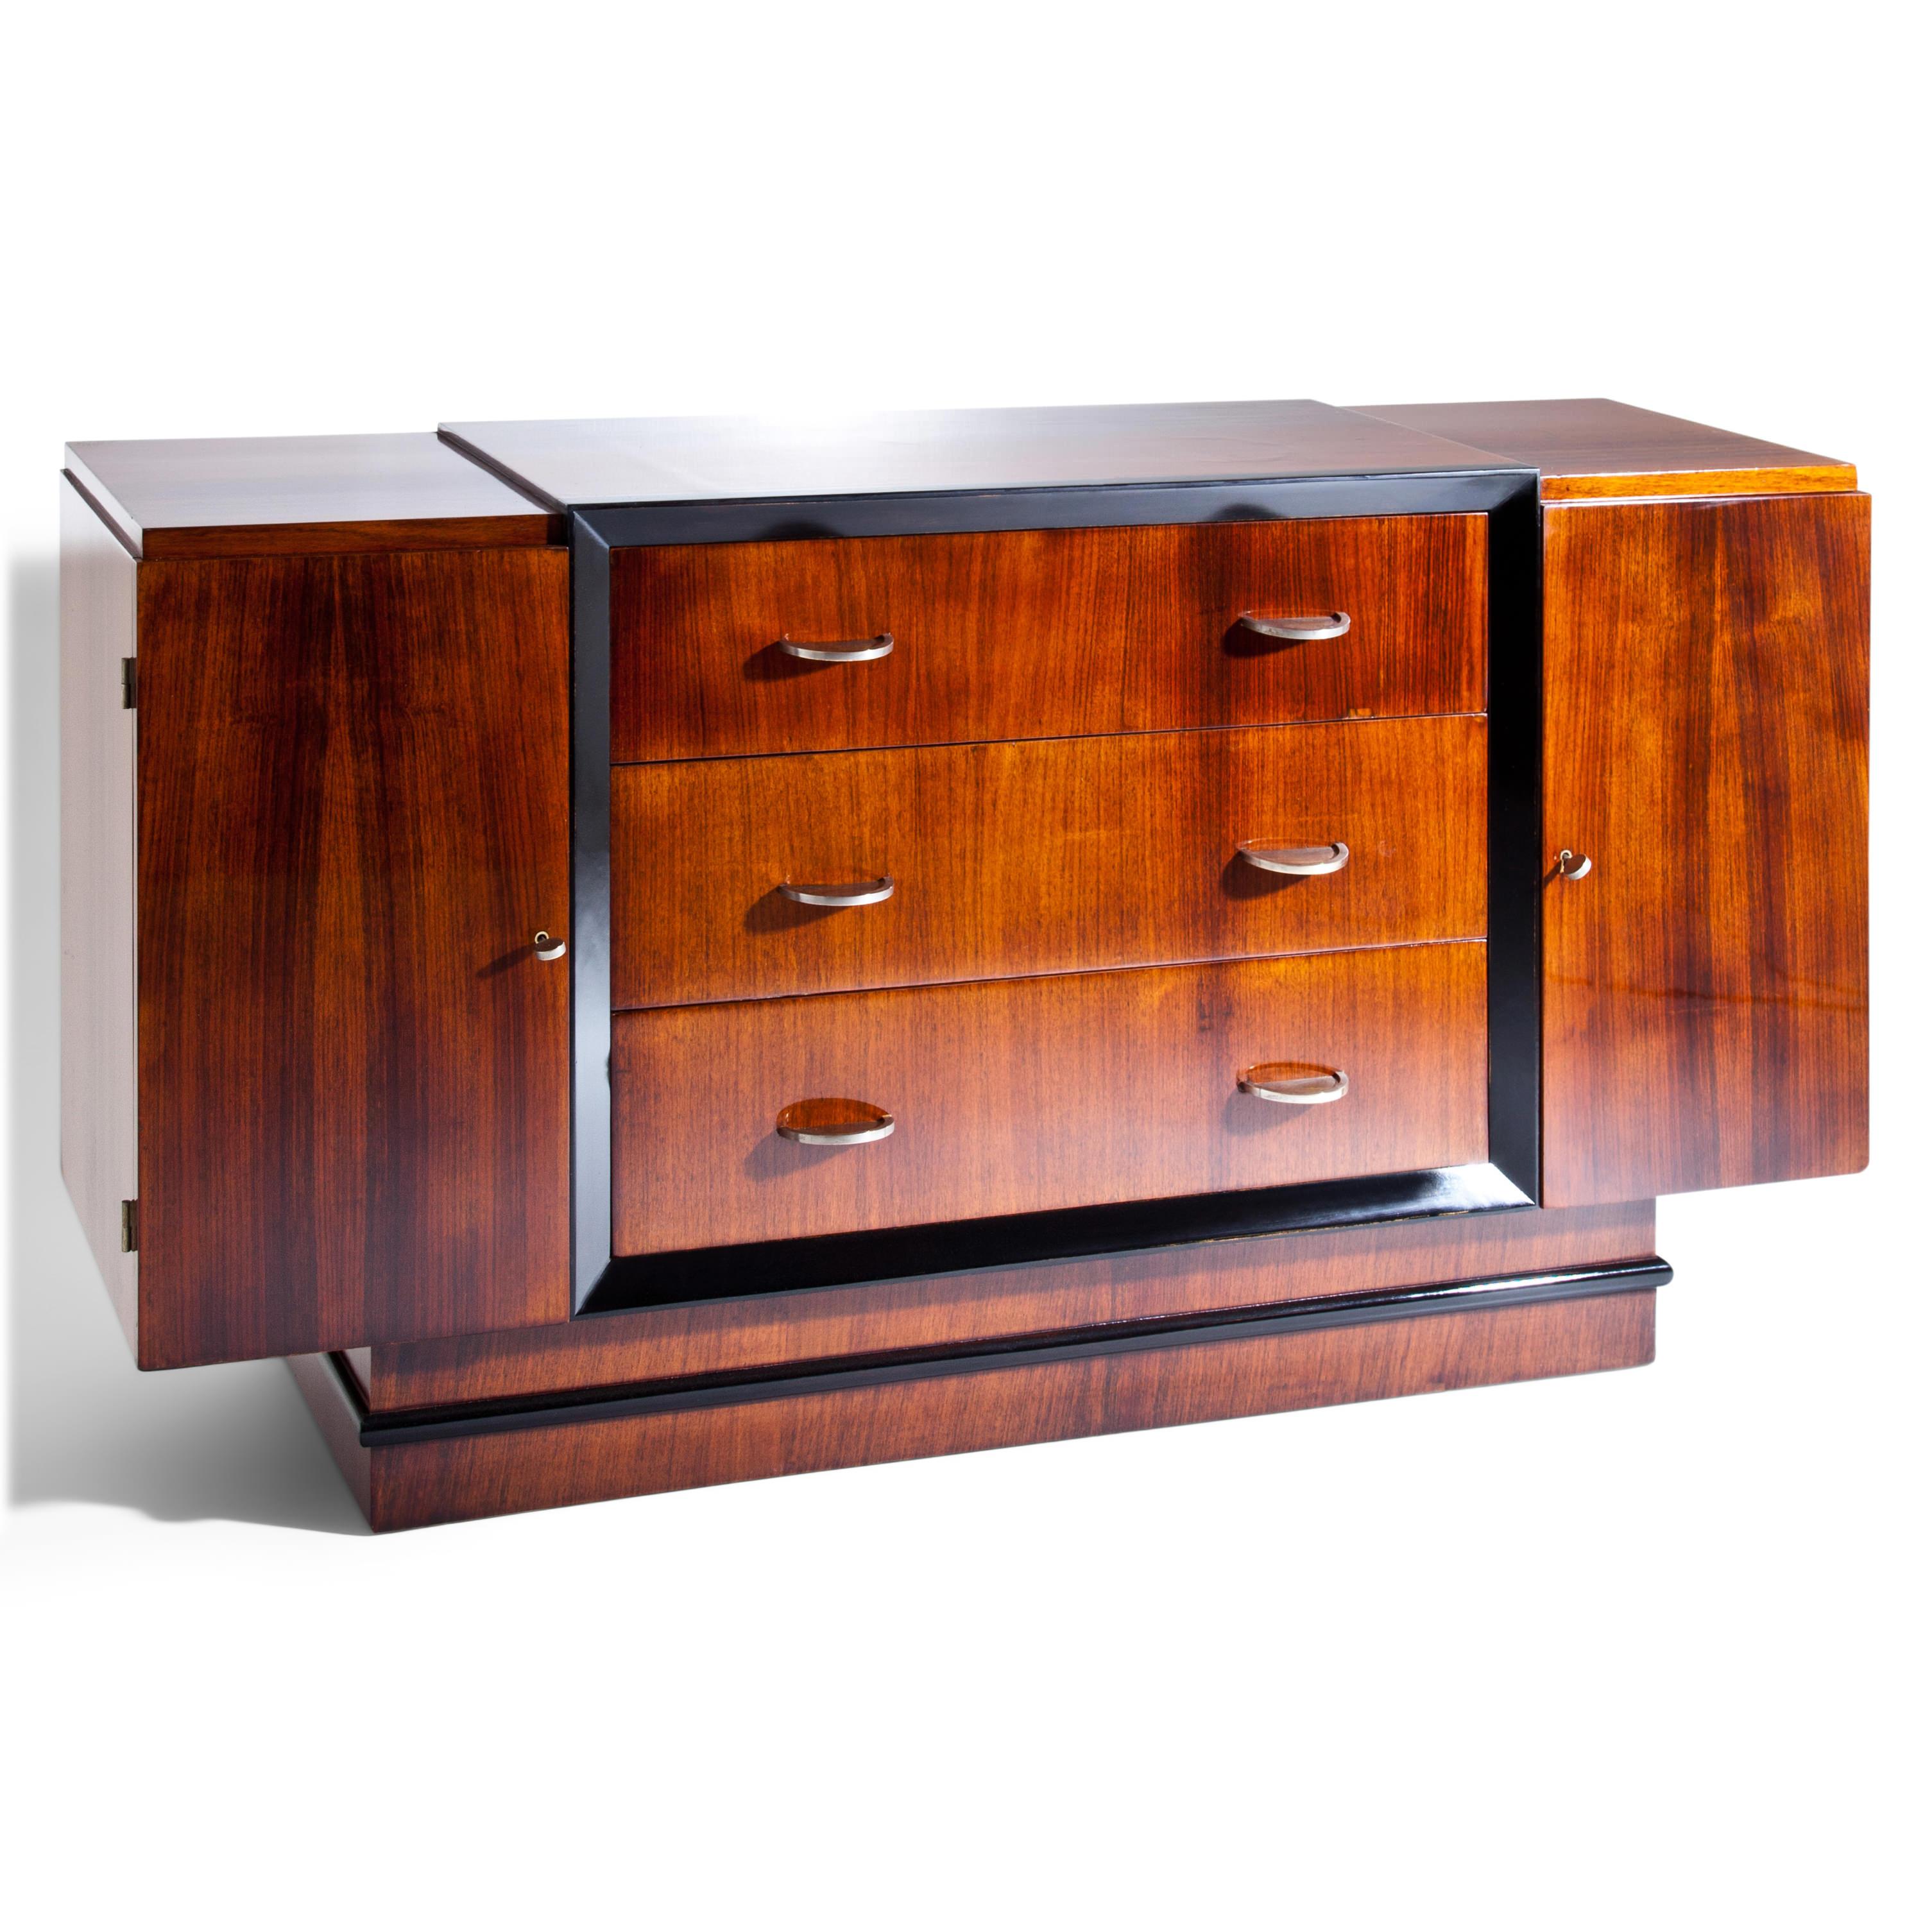 Art Deco sideboard with three drawers and two doors on a straight plinth with ebonized all-round profile strip. The disc-shaped brass handles emerge as semicircles from the veneered fronts. The drawers are visually set off by an ebonized frame.